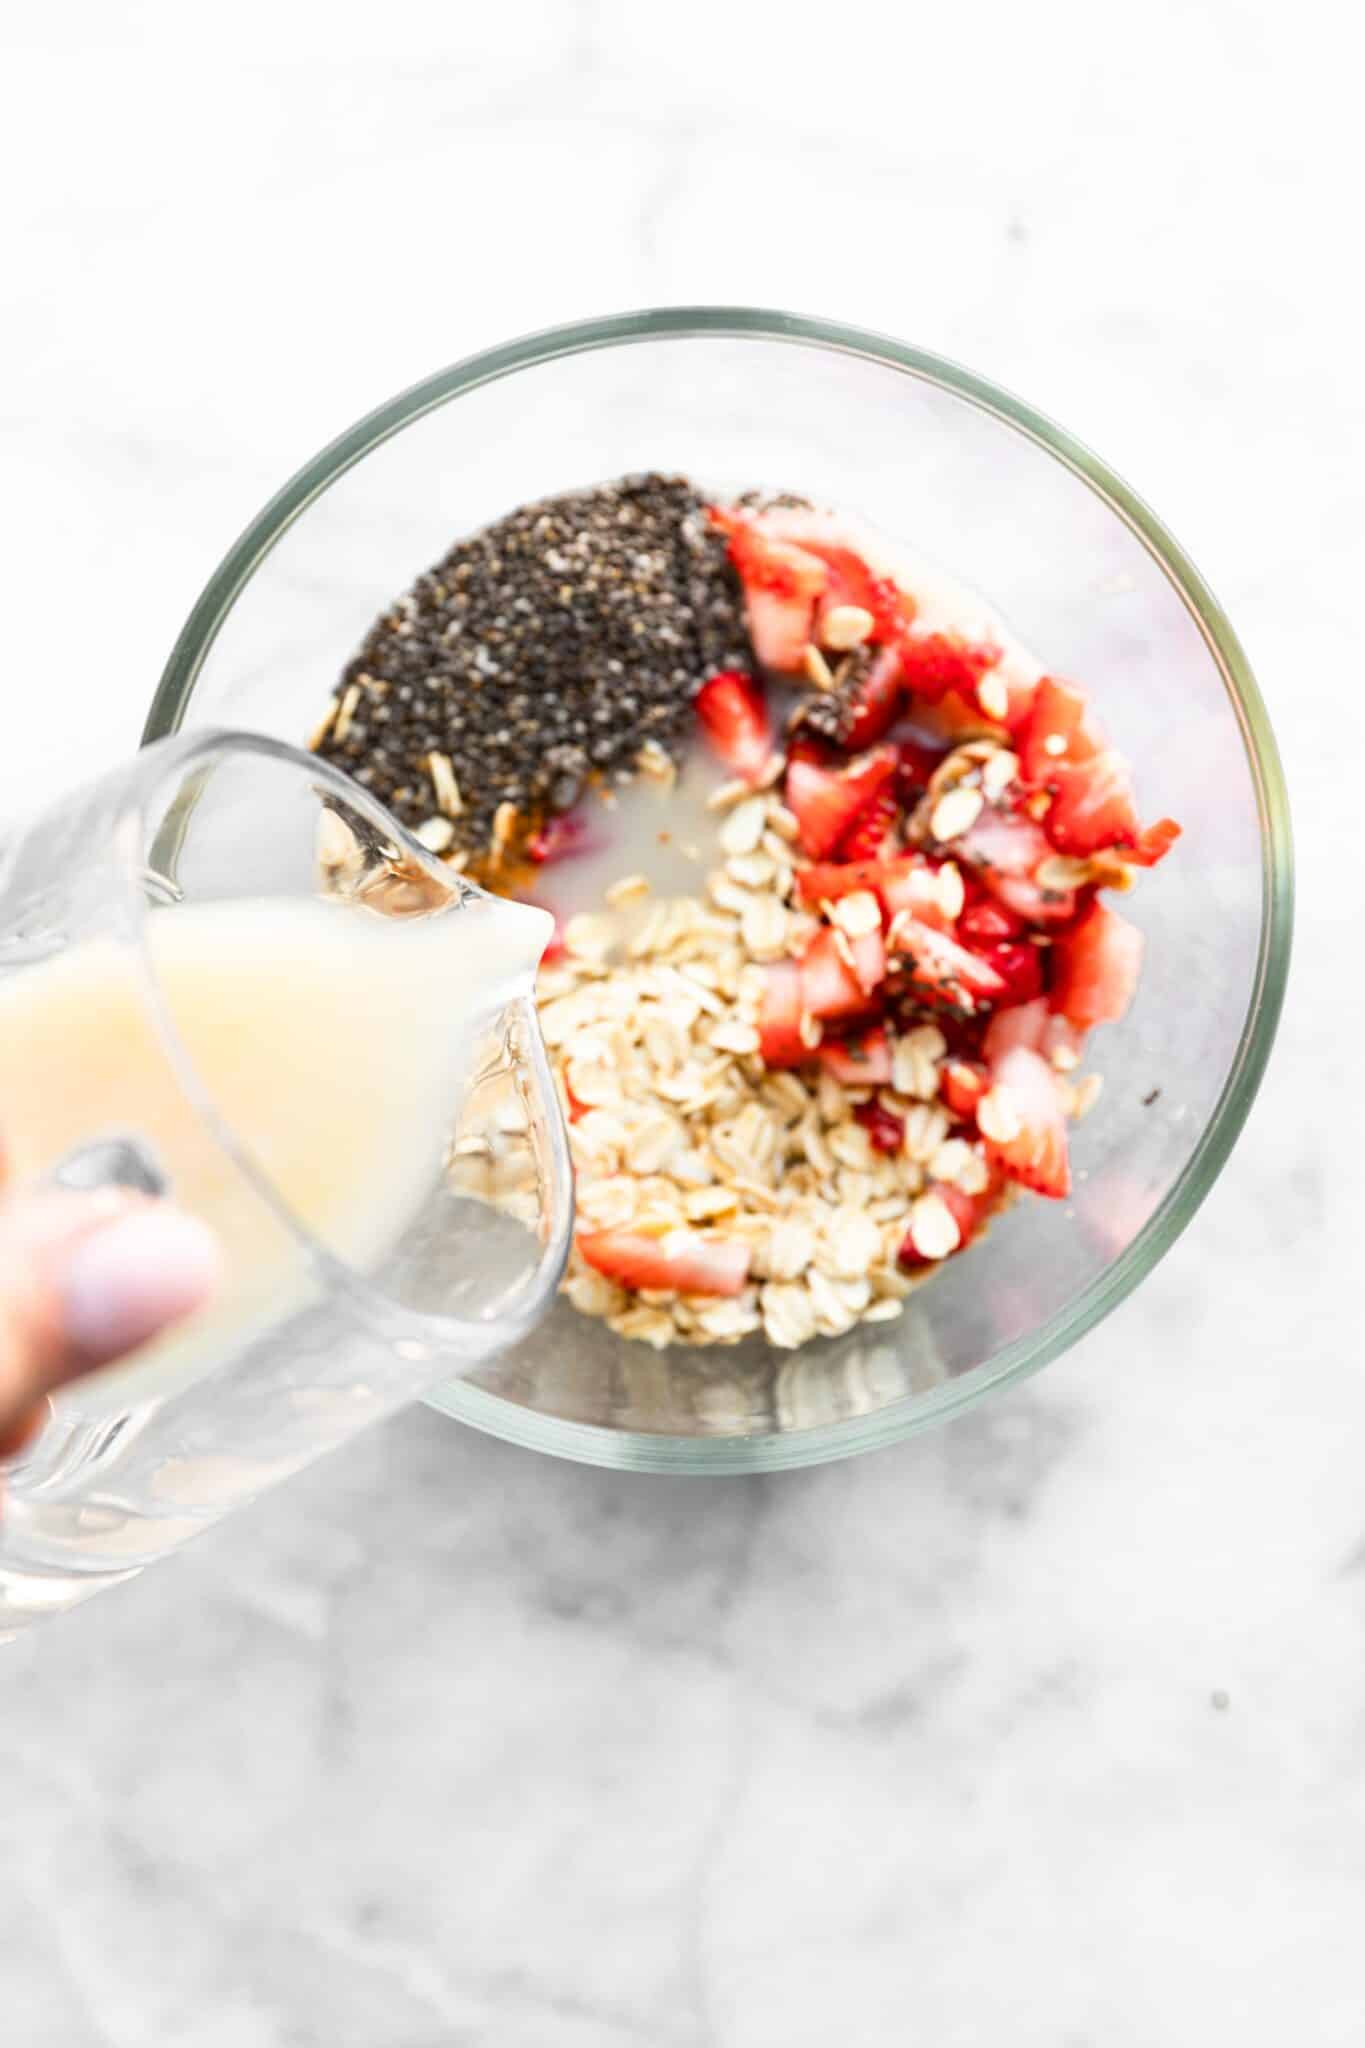 Strawberry Overnight Oats with Chia Seeds I Cotter Crunch